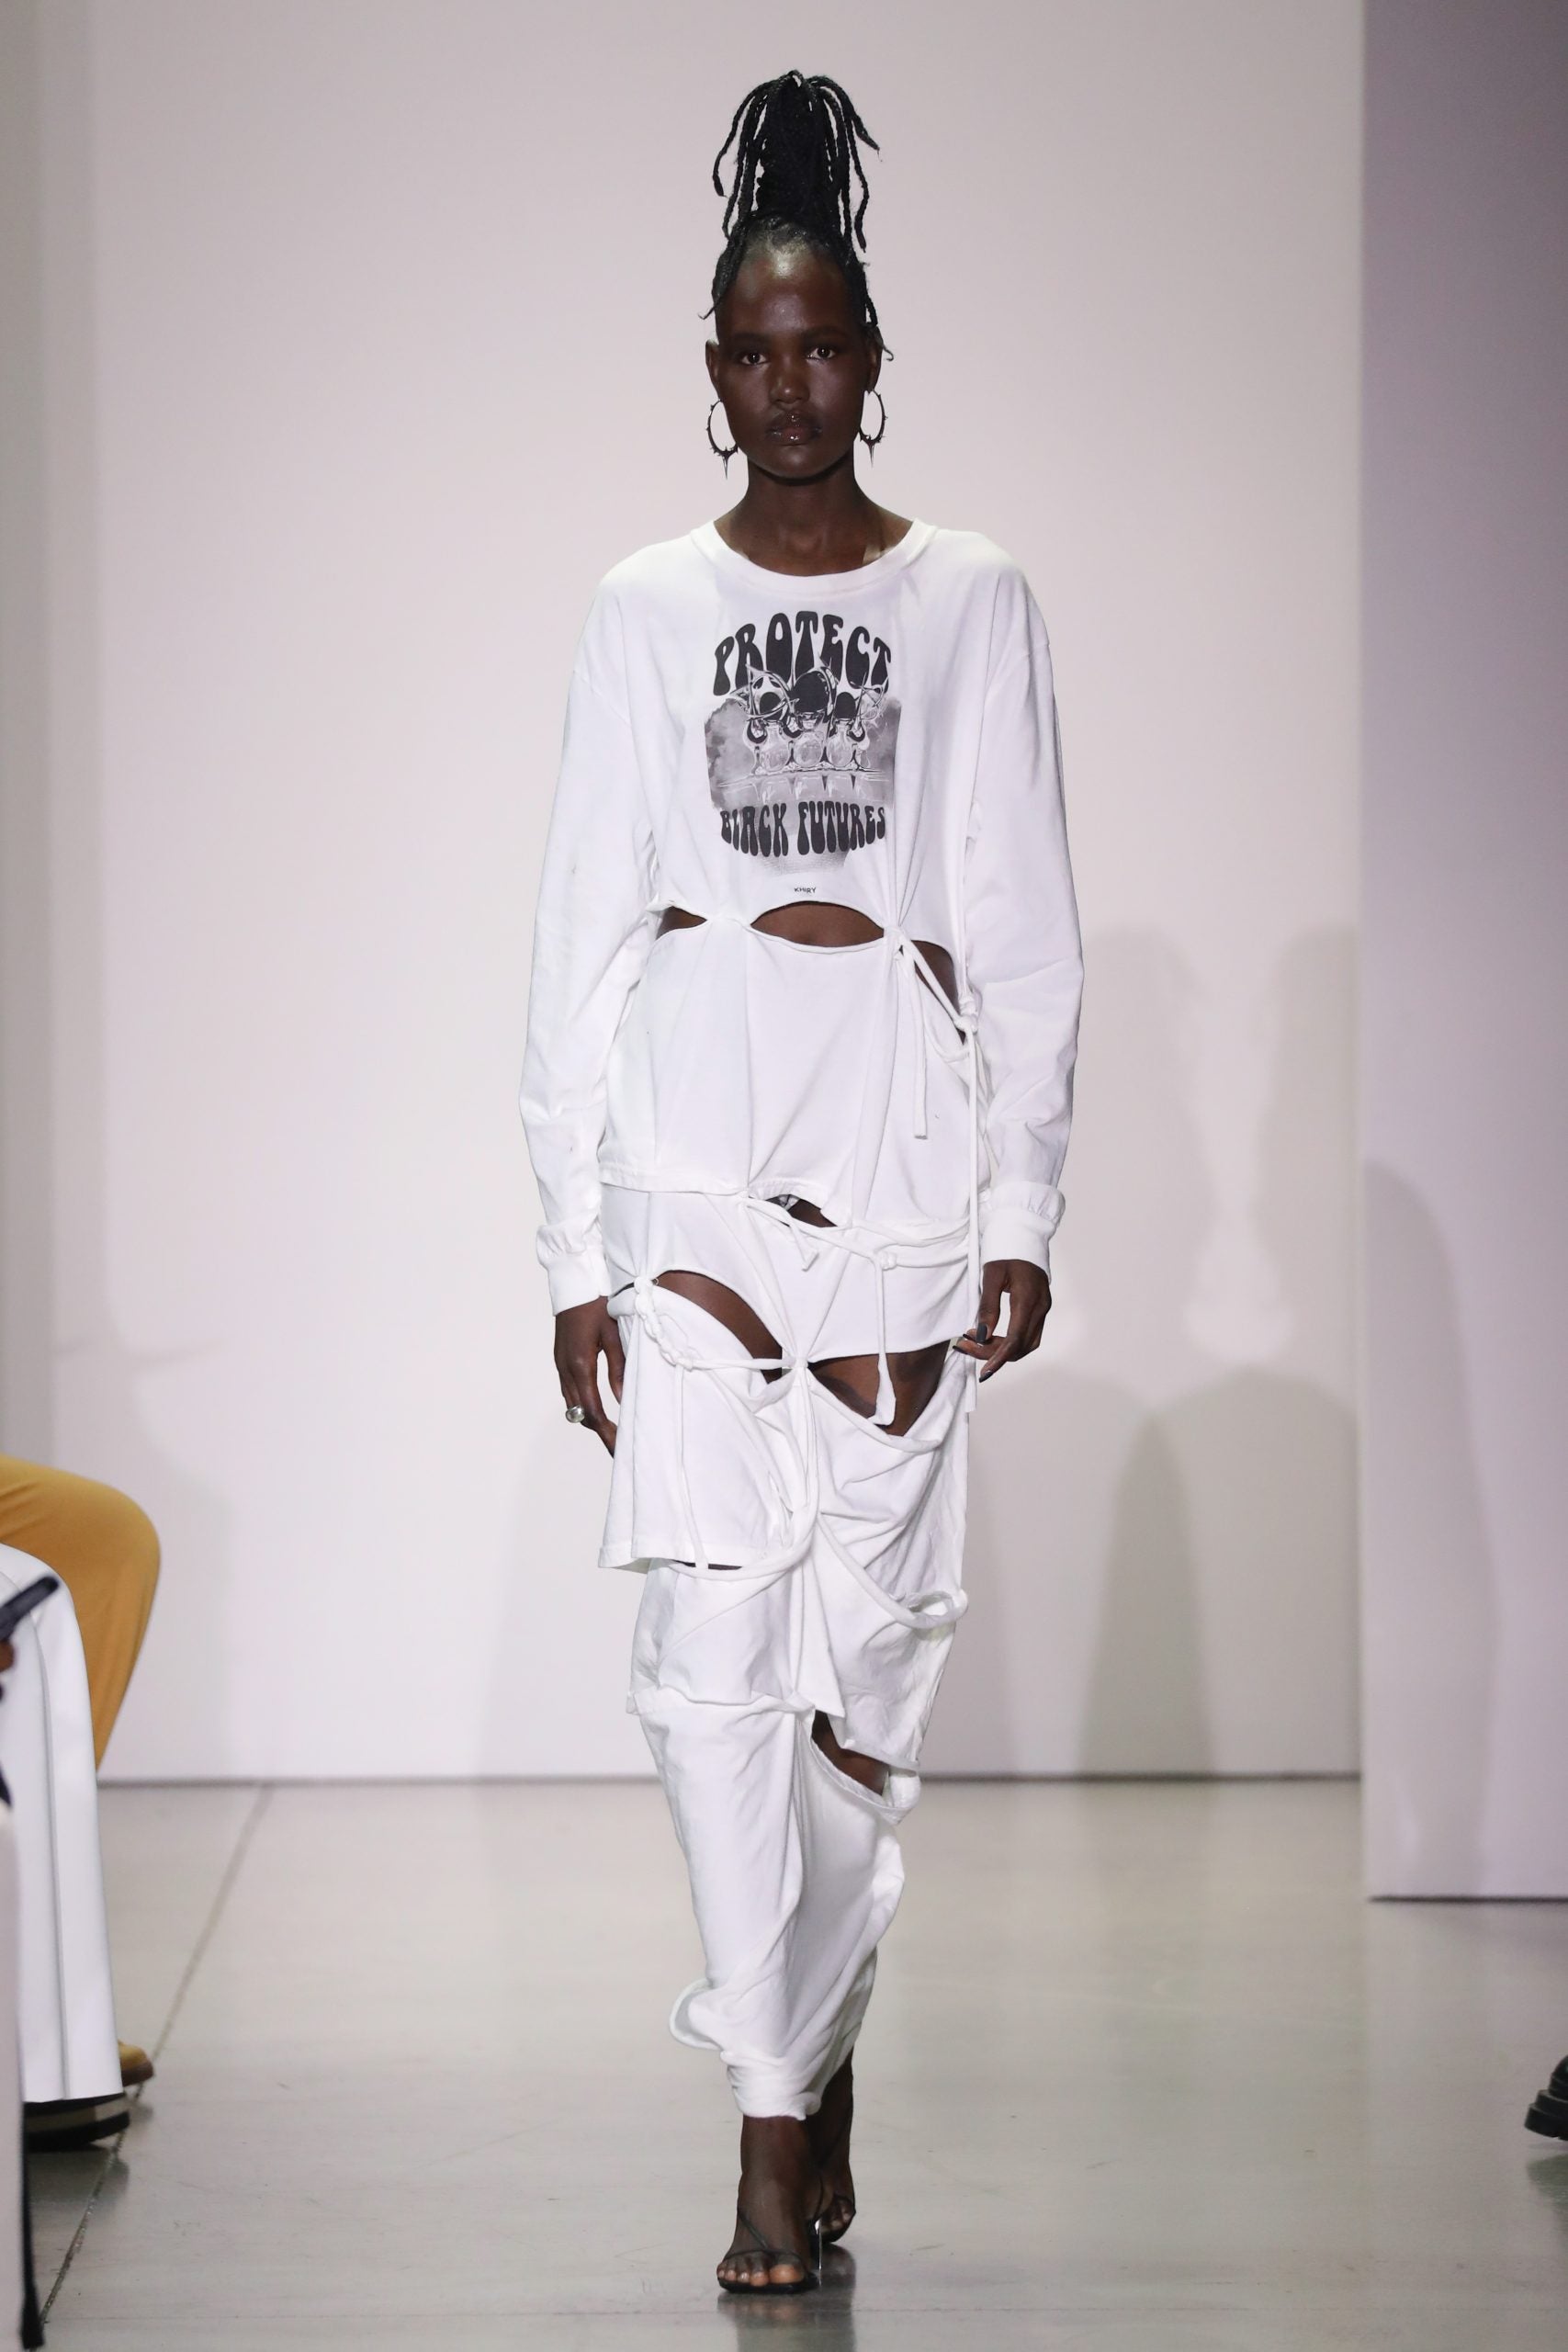 IN THE BLK Spotlights KHIRY, House of Aama And Third Crown At NYFW